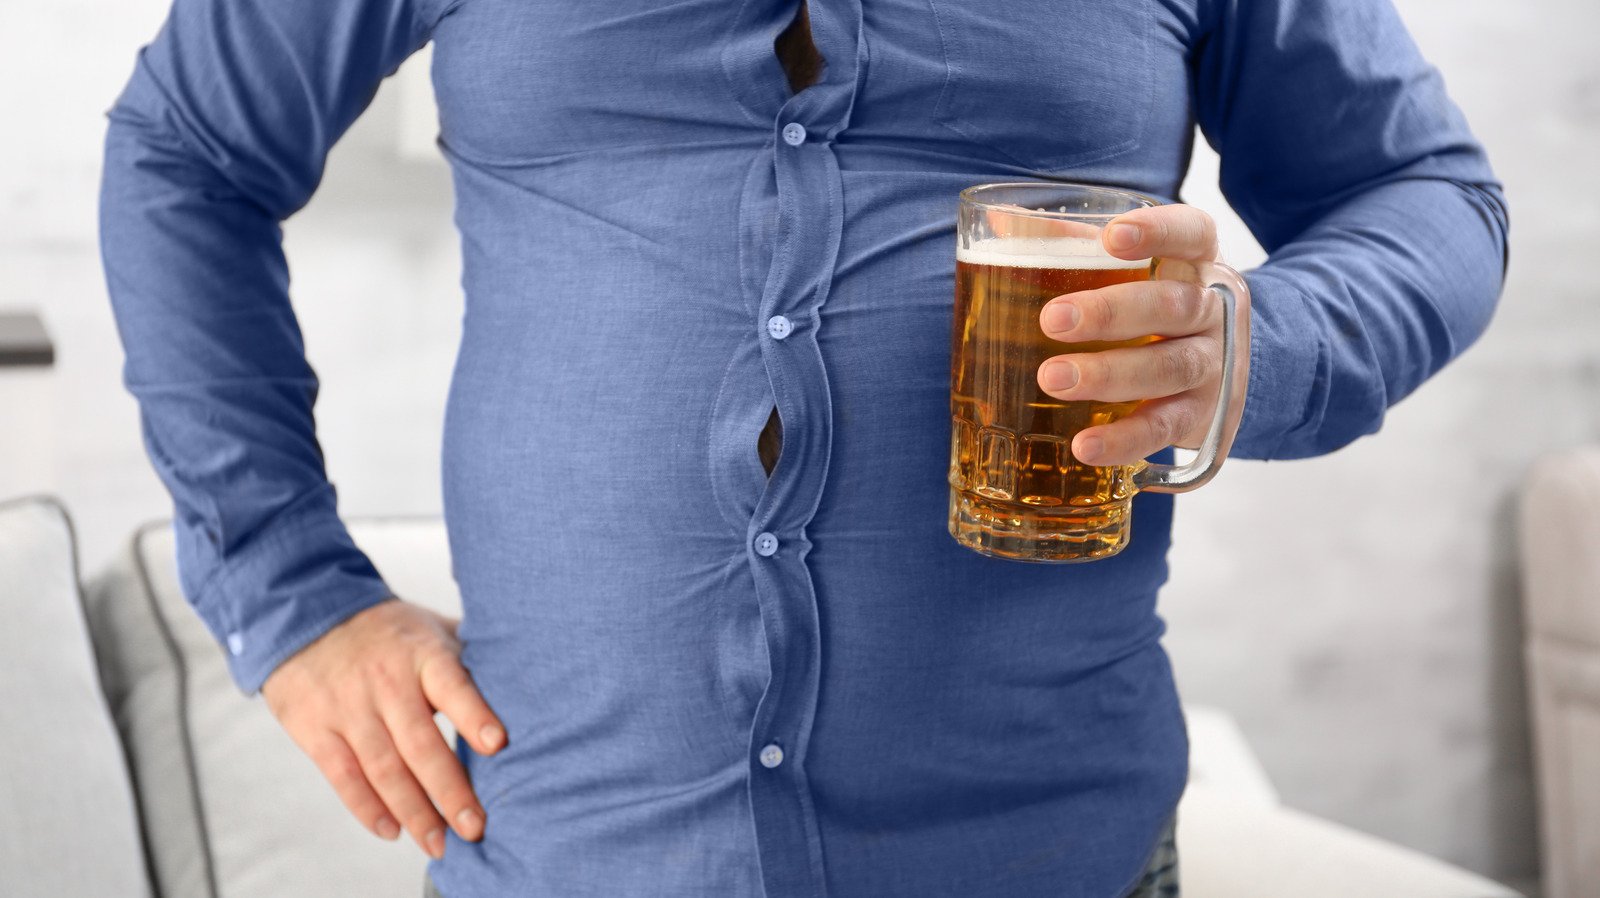 What Is Beer Belly And How Can You Get Rid Of It?